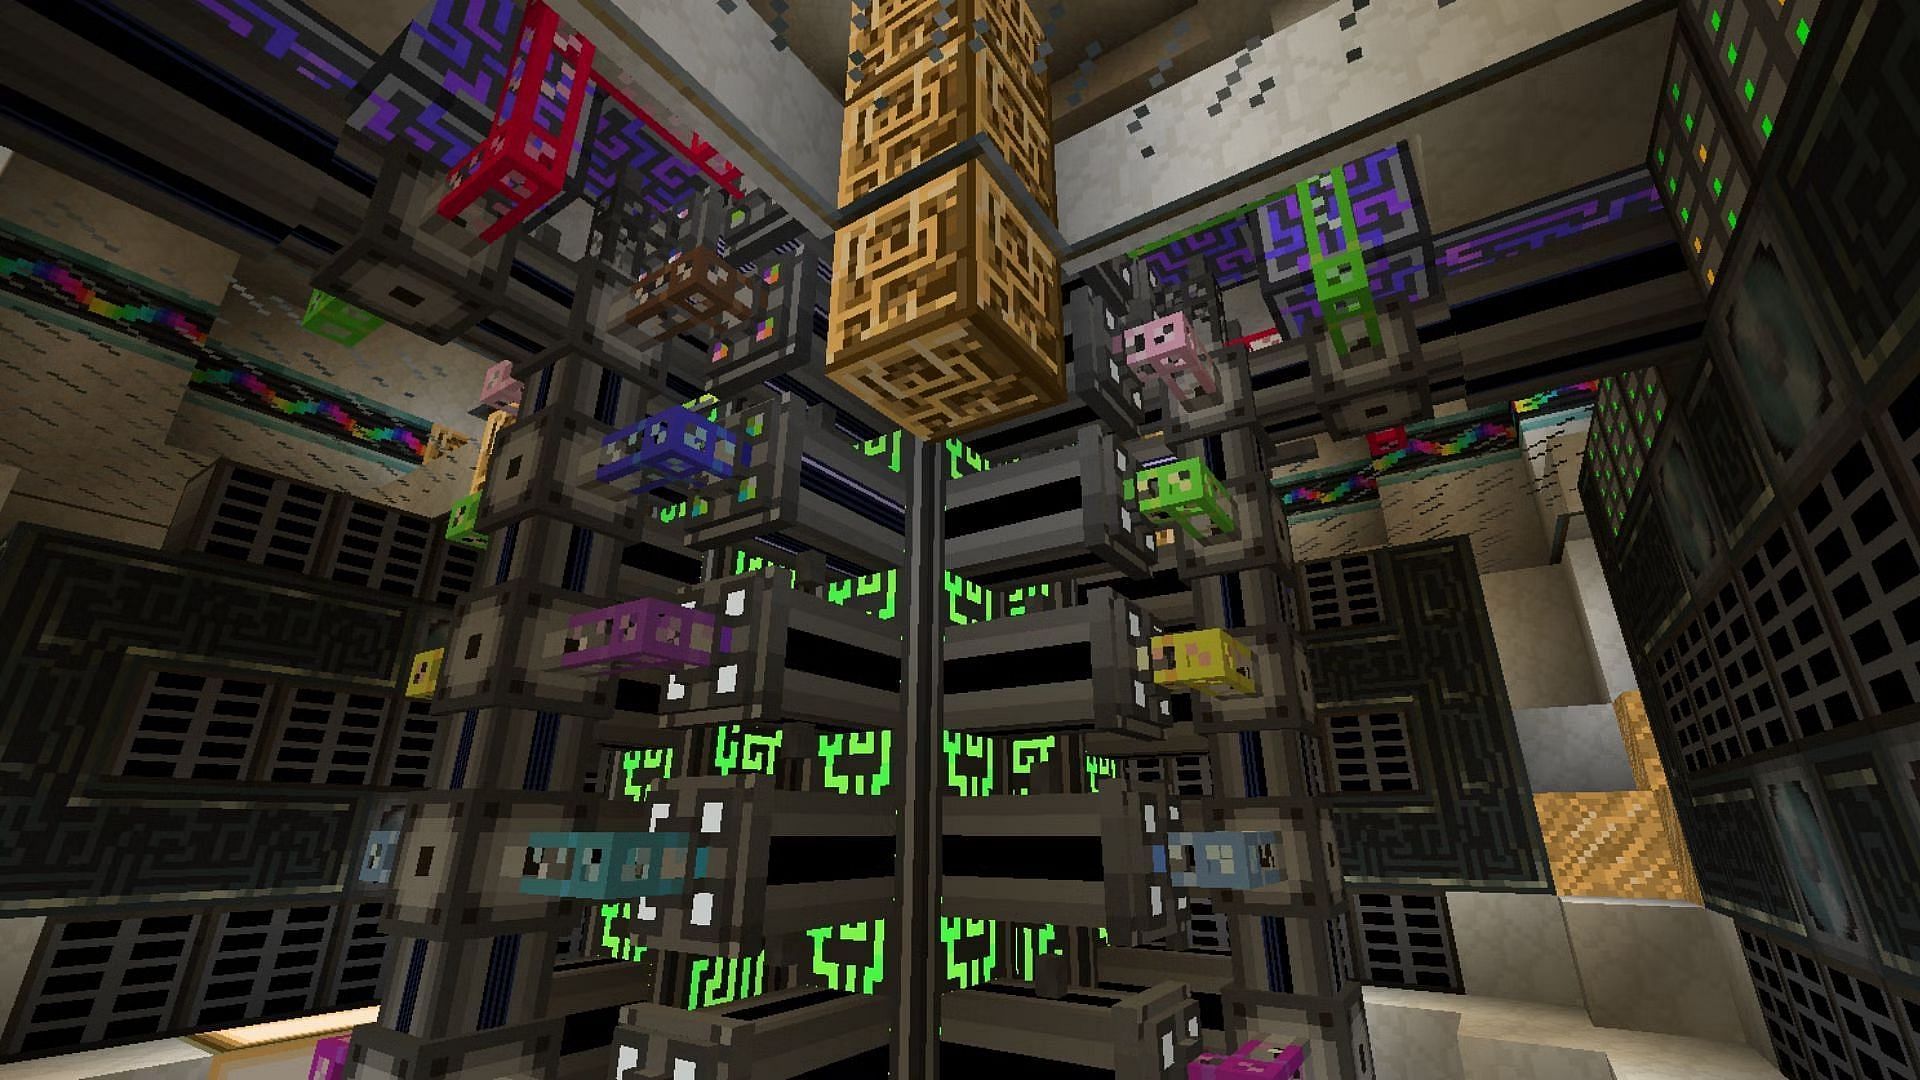 Applied energistics is the most famous technical mod for Minecraft. (Image via Reddit/u/A_Very_Bravo_Taco)